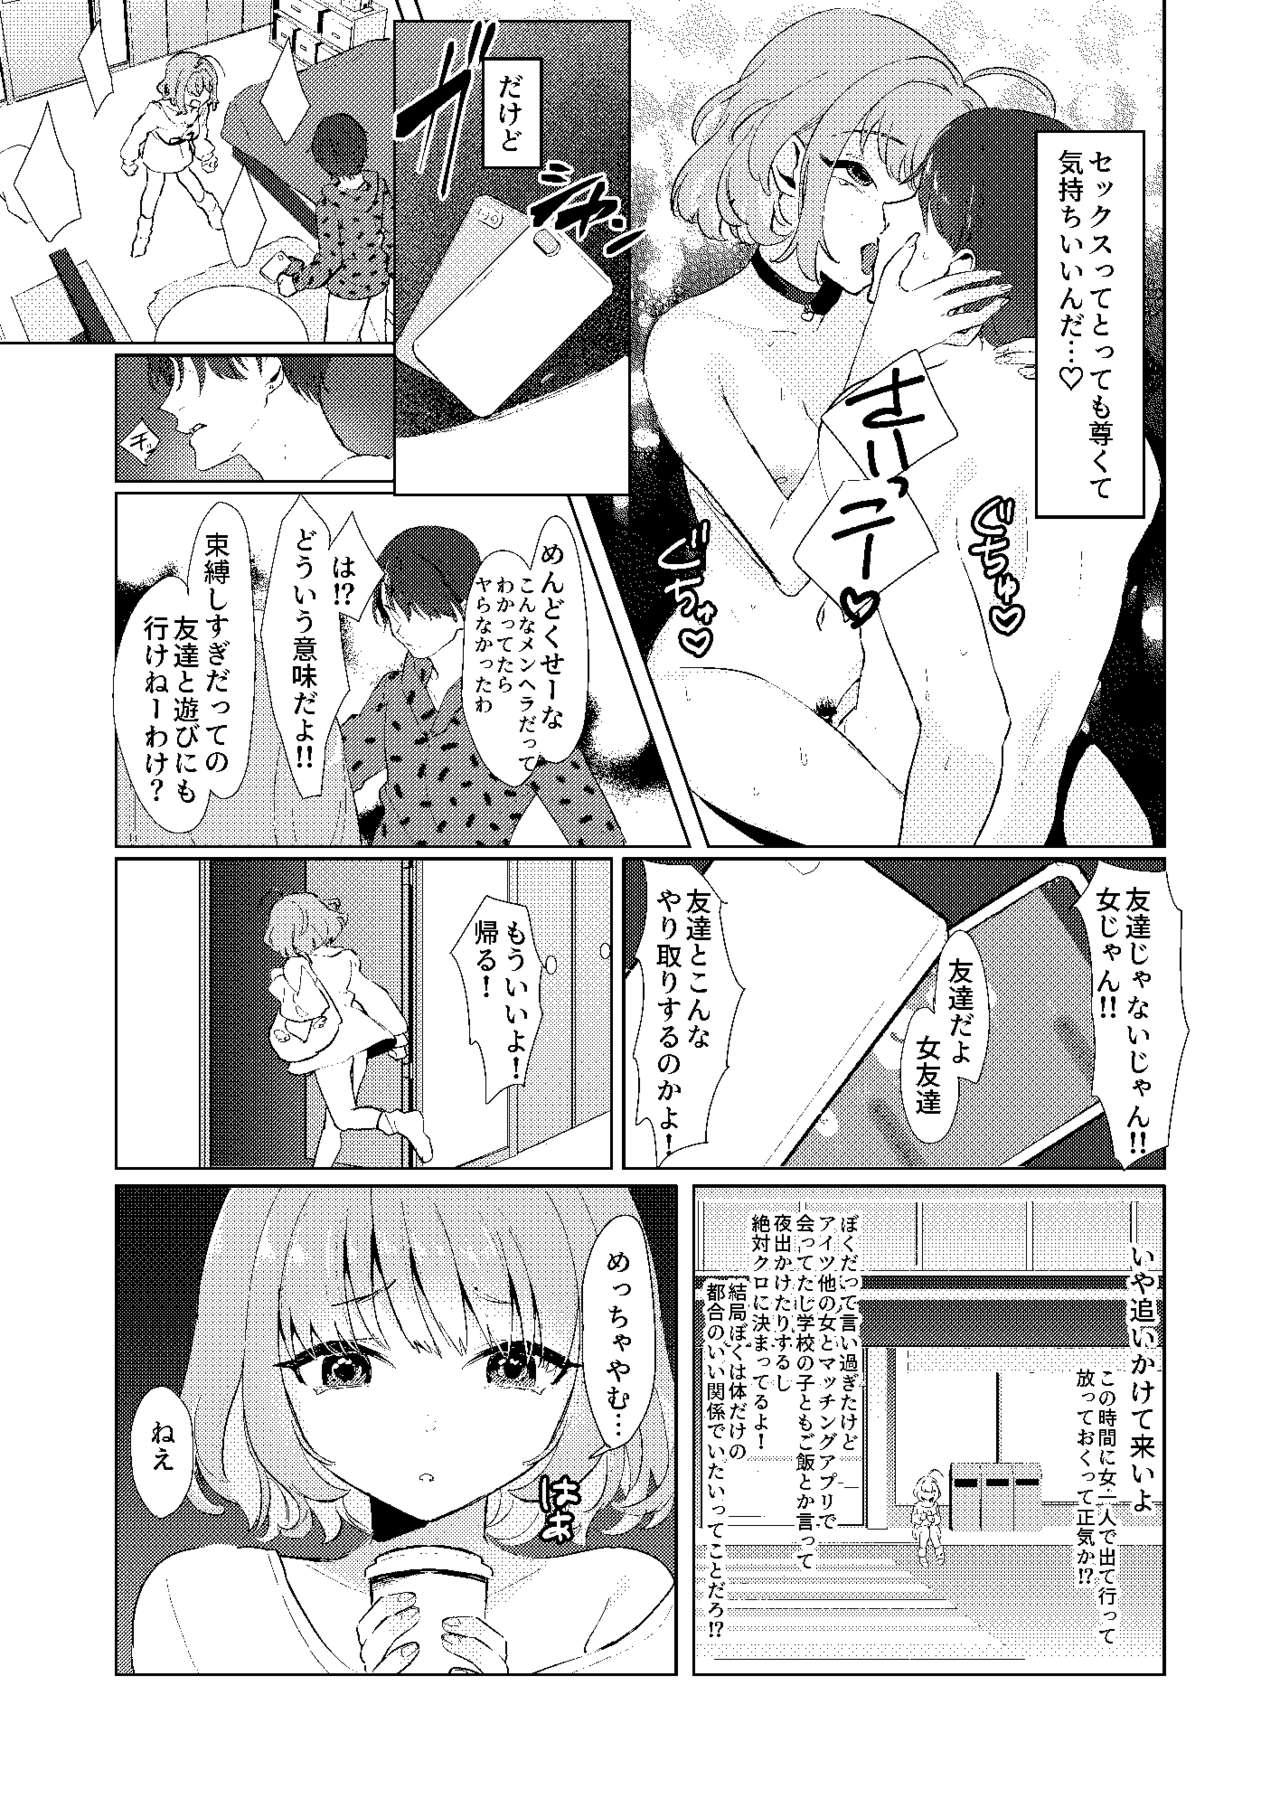 Outdoor Sex 夢〇りあむの青春 - The idolmaster Spoon - Page 10